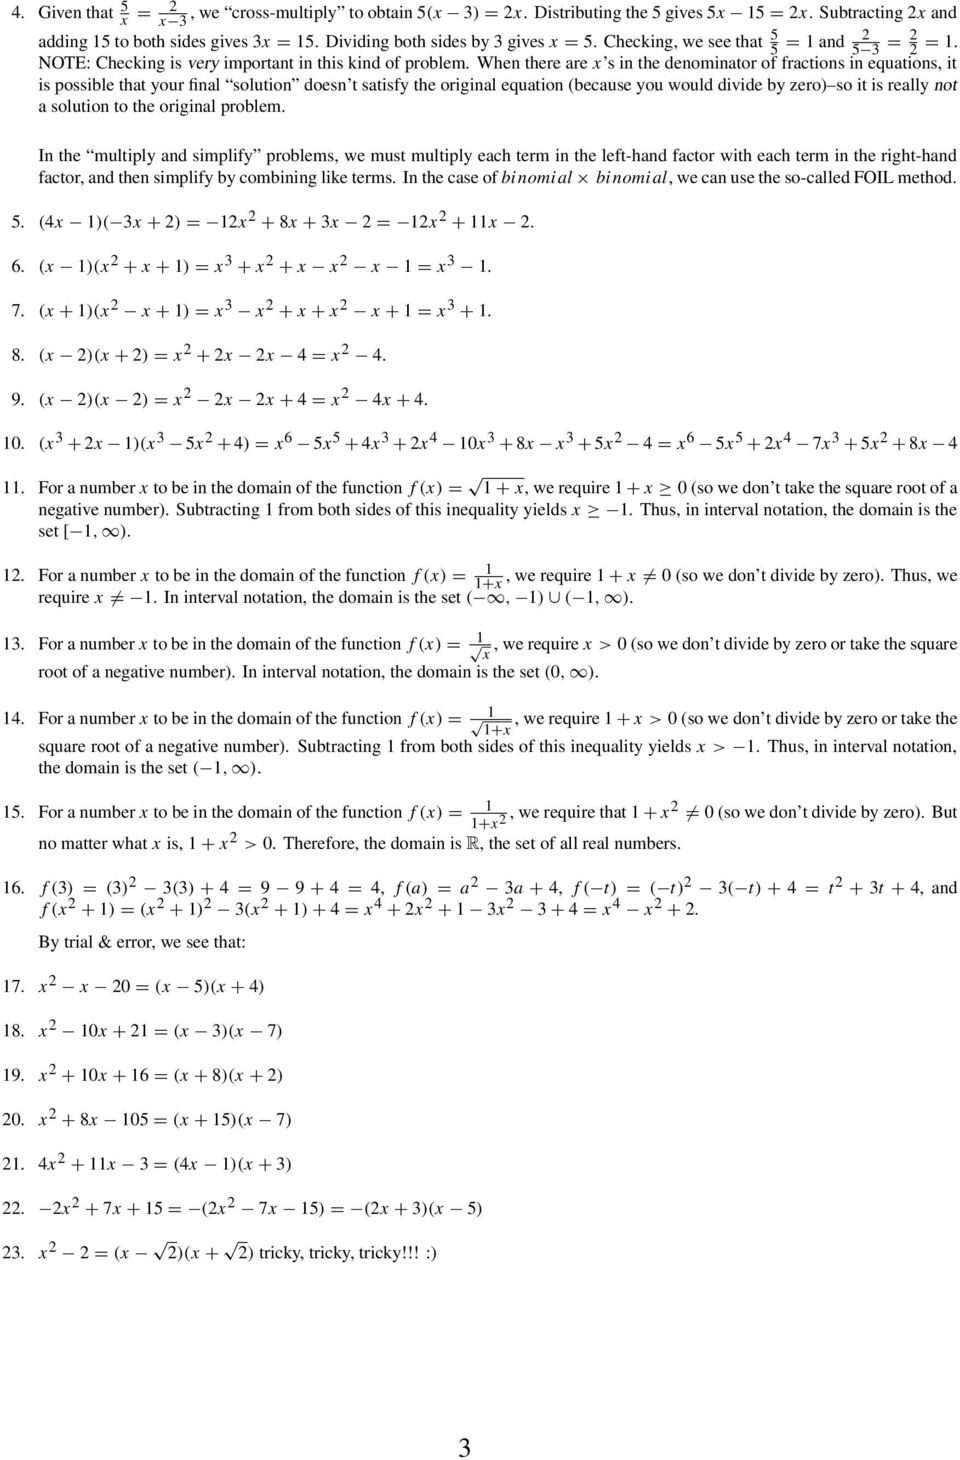 When there are x s in the denominator of fractions in equations, it is possible that your final solution doesn t satisfy the original equation (because you would divide by zero) so it is really not a